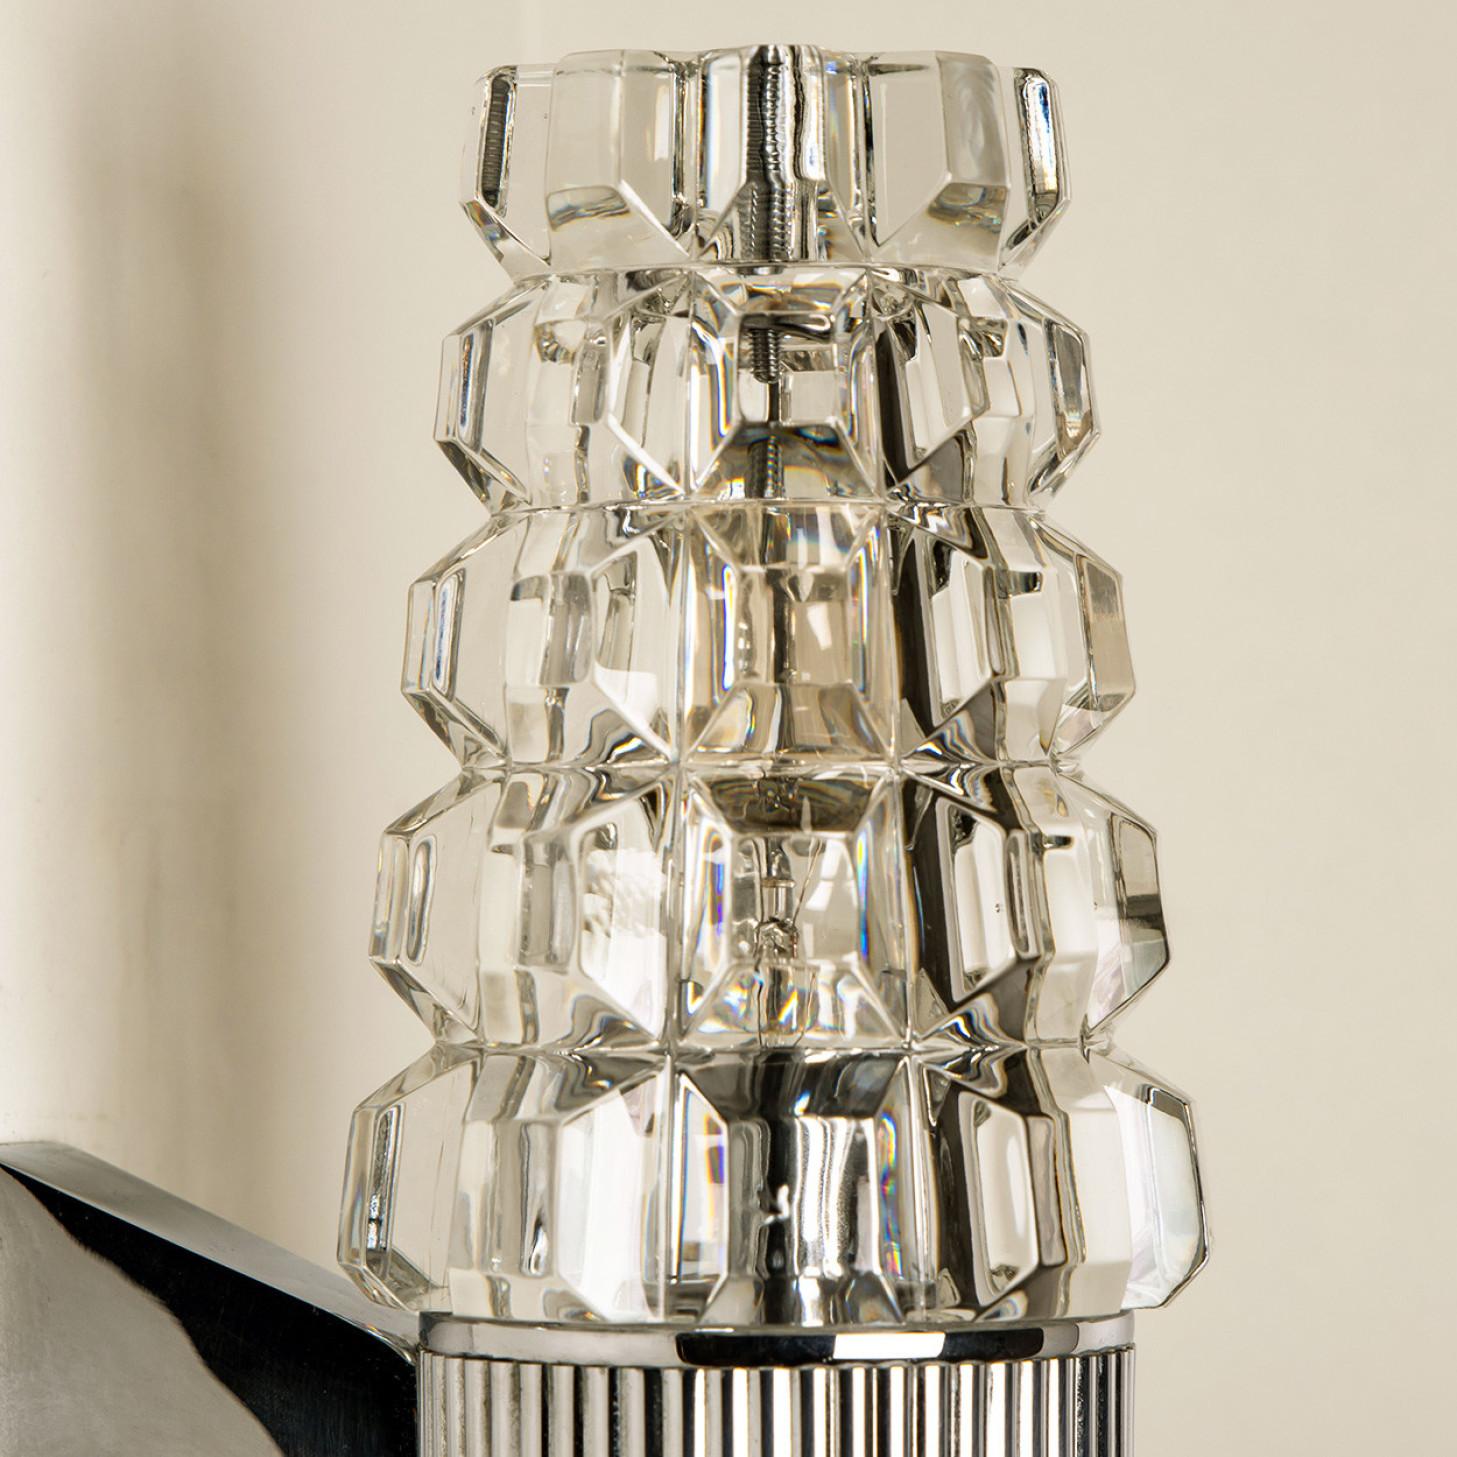 Hourglass Shaped Chrome Wallsconce, France, Europe, 1970s For Sale 8